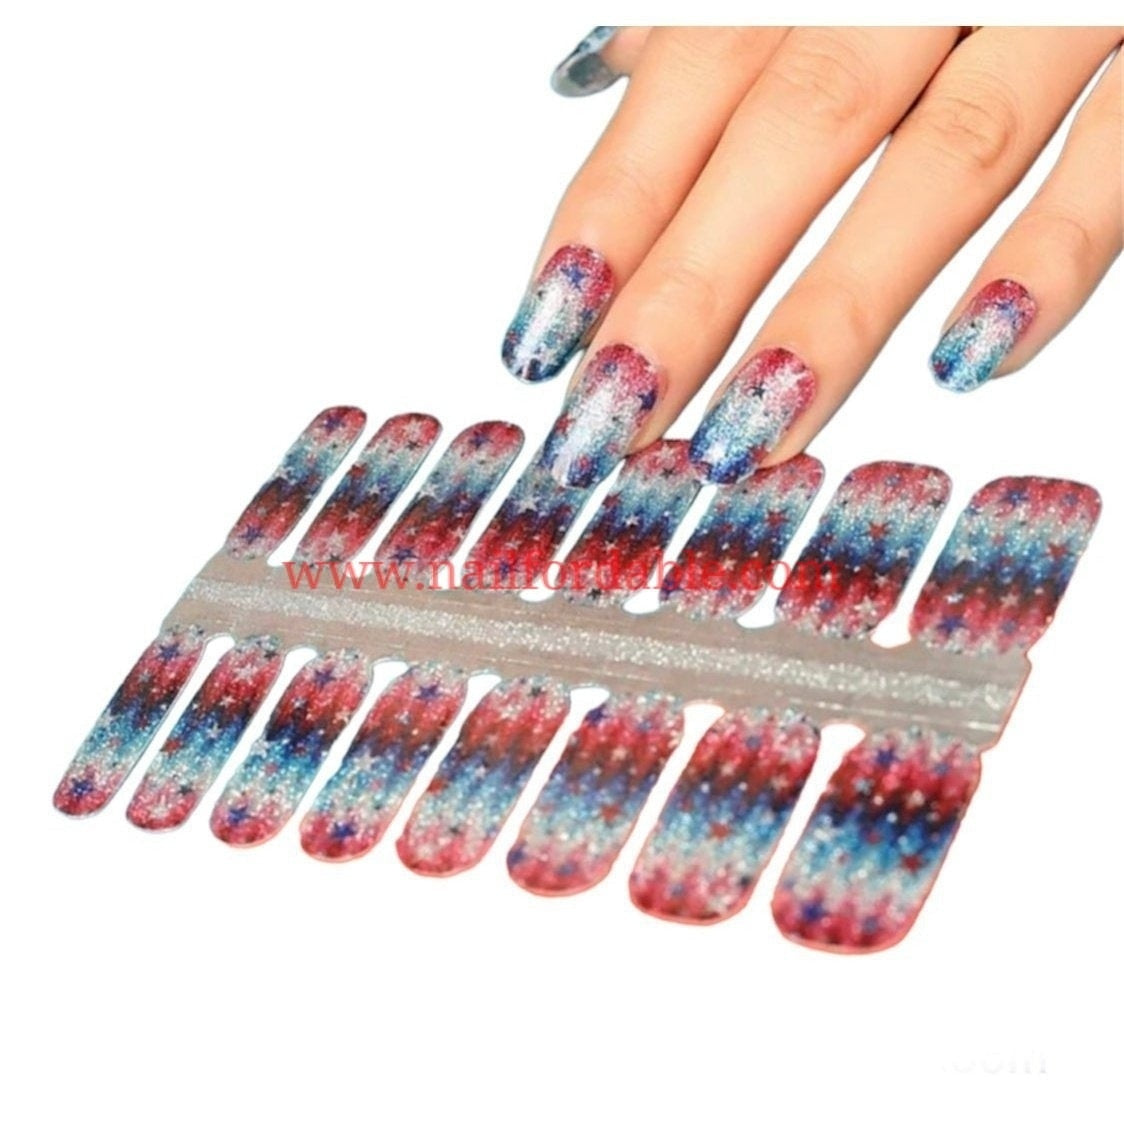 Independence stars Nail Wraps | Semi Cured Gel Wraps | Gel Nail Wraps |Nail Polish | Nail Stickers